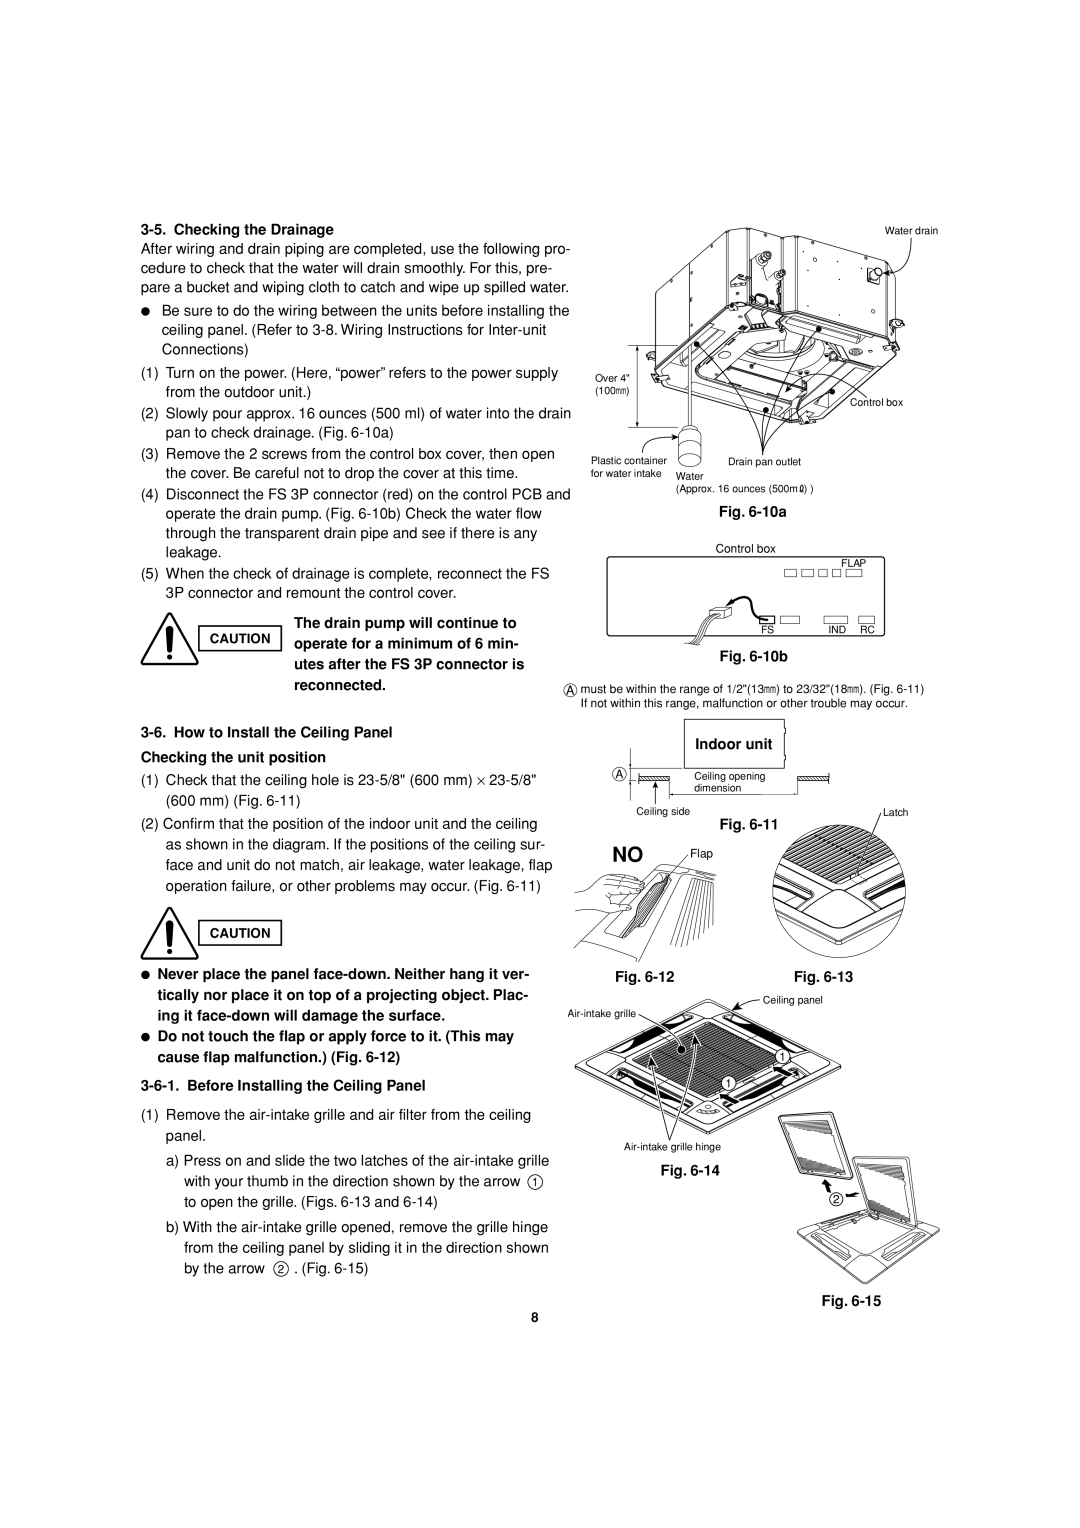 Sanyo XMHS1272 Checking the Drainage, 10a, 10b, How to Install the Ceiling Panel, Checking the unit position, Indoor unit 